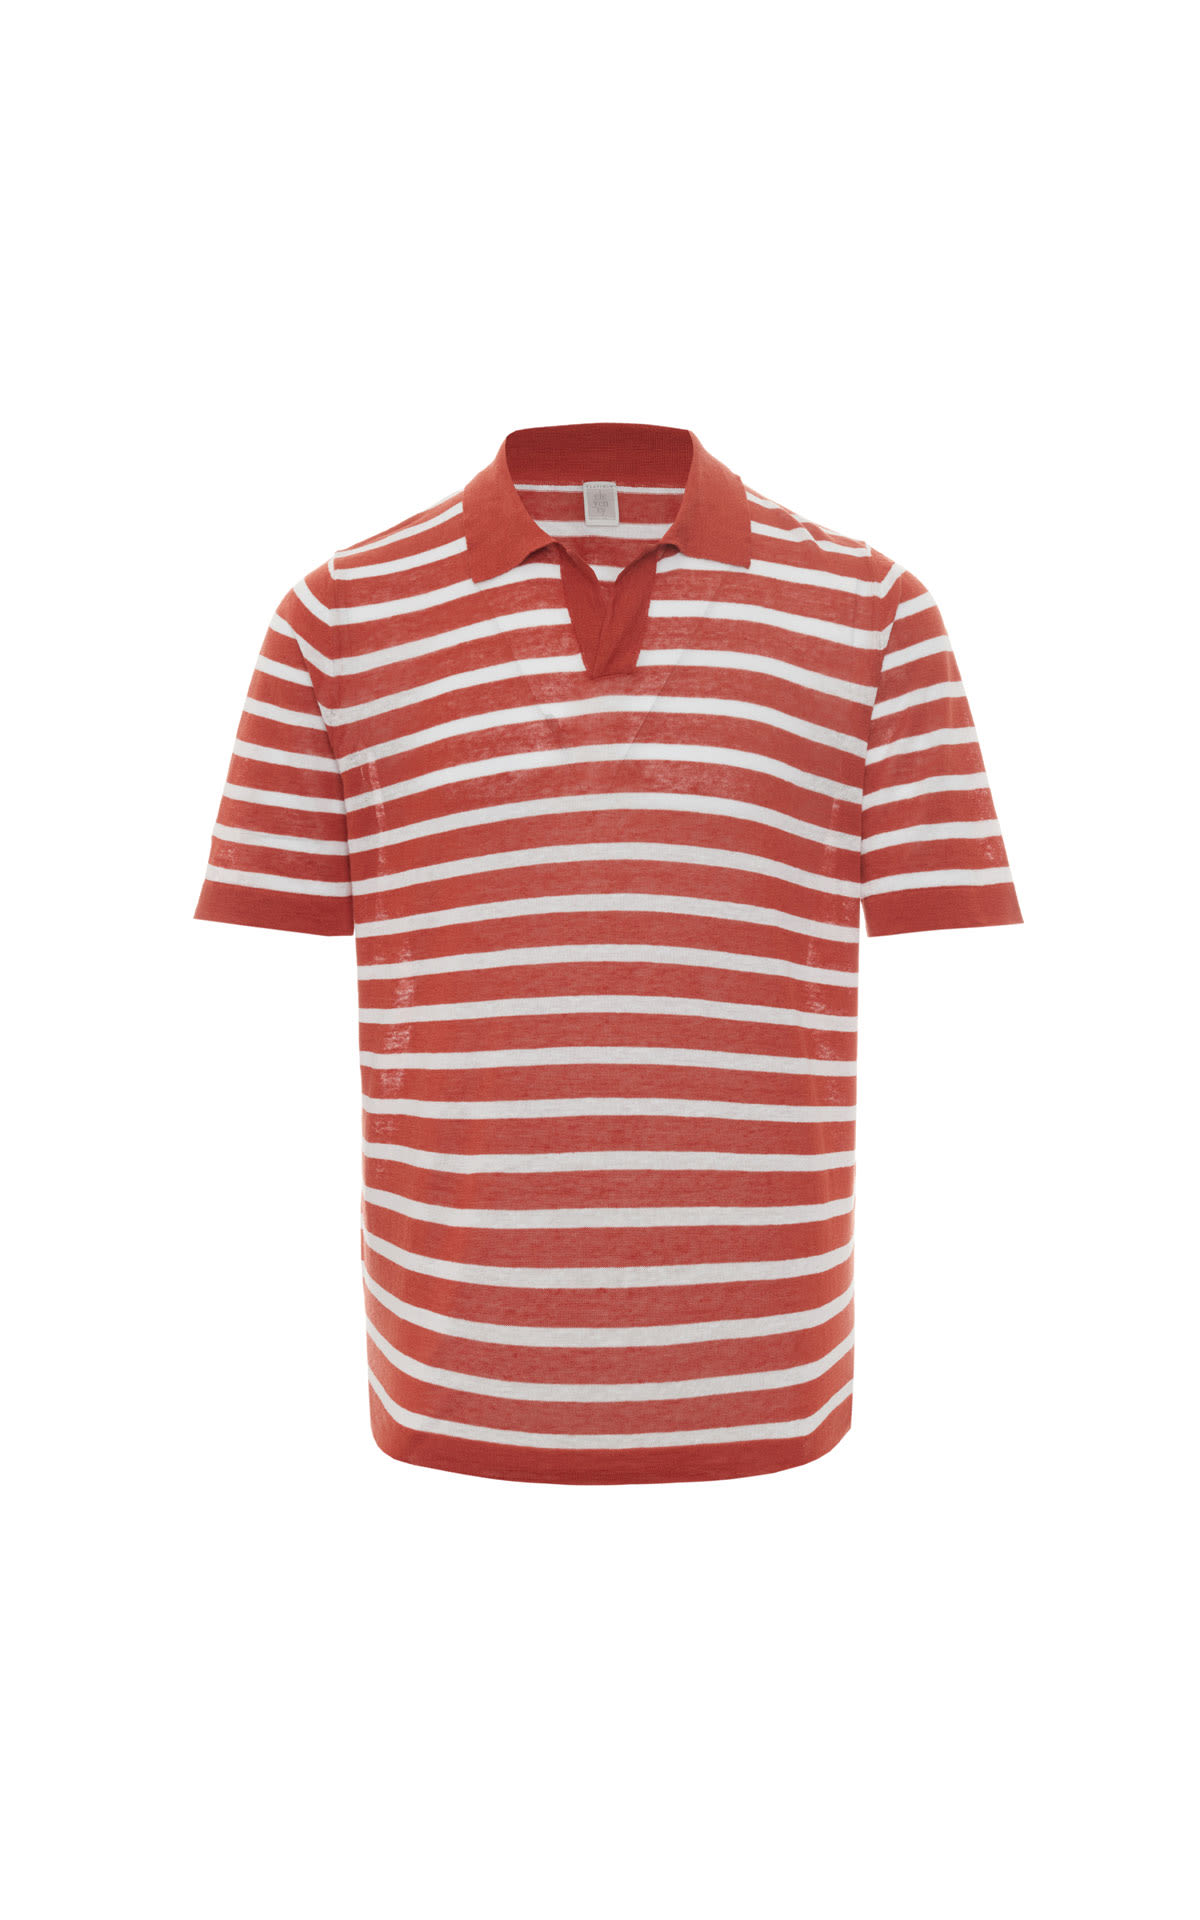 Eleventy Stripe polo t-shirt from Bicester Village